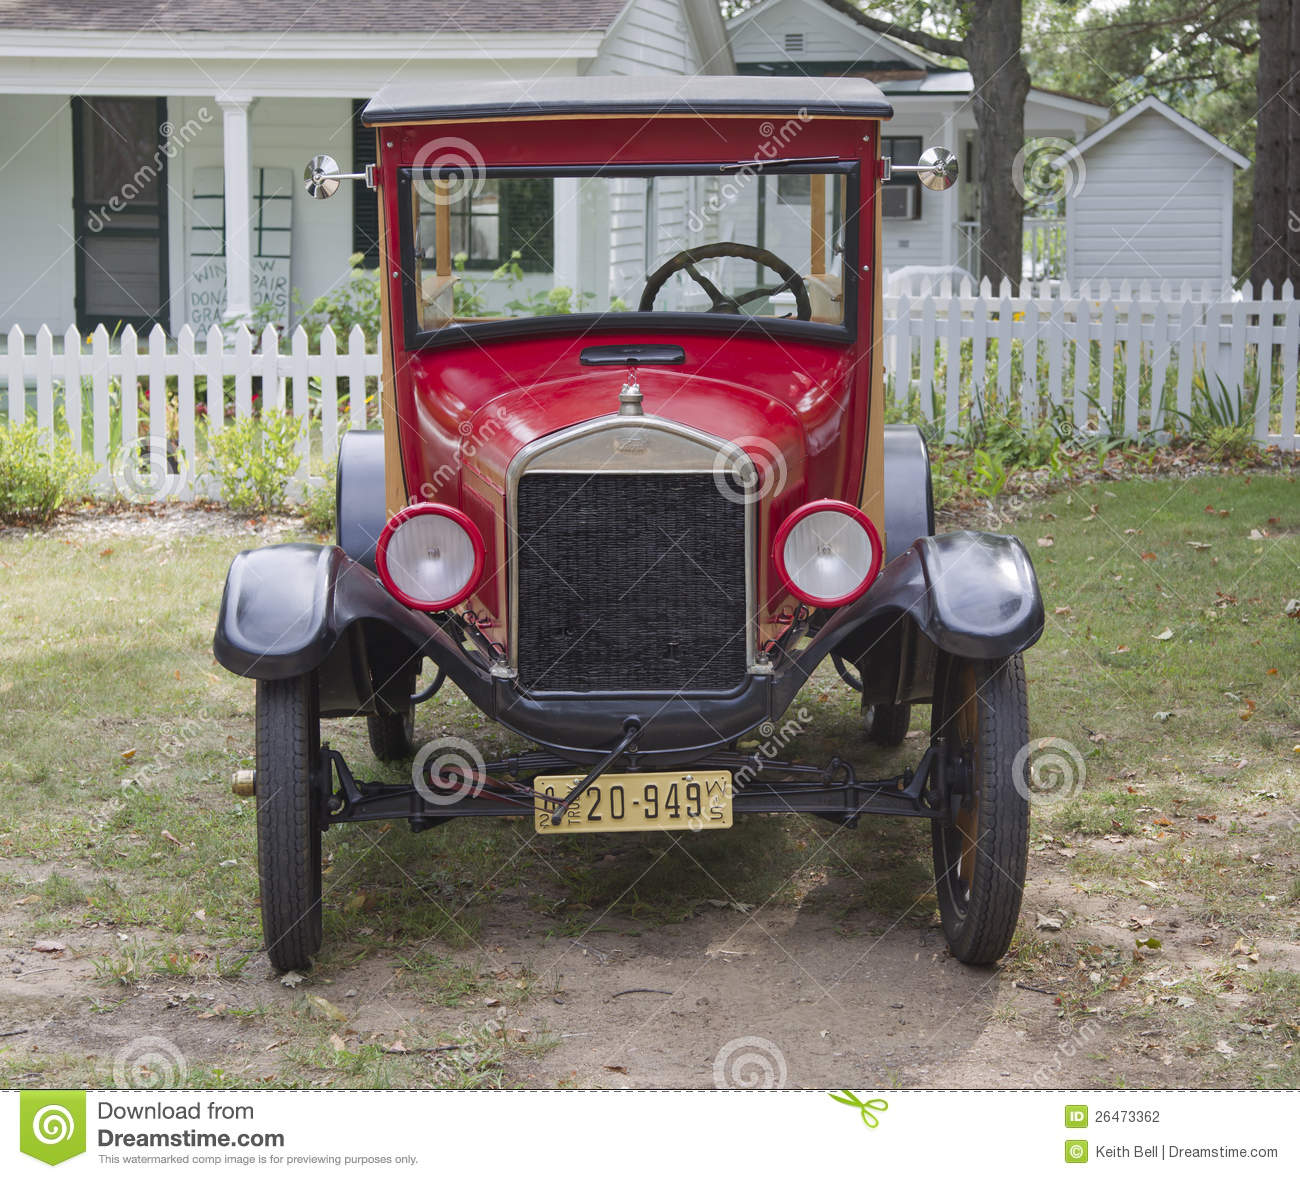 Waupaca Wi   August 25  Front View Of A 1926 Ford Model T Red Car At